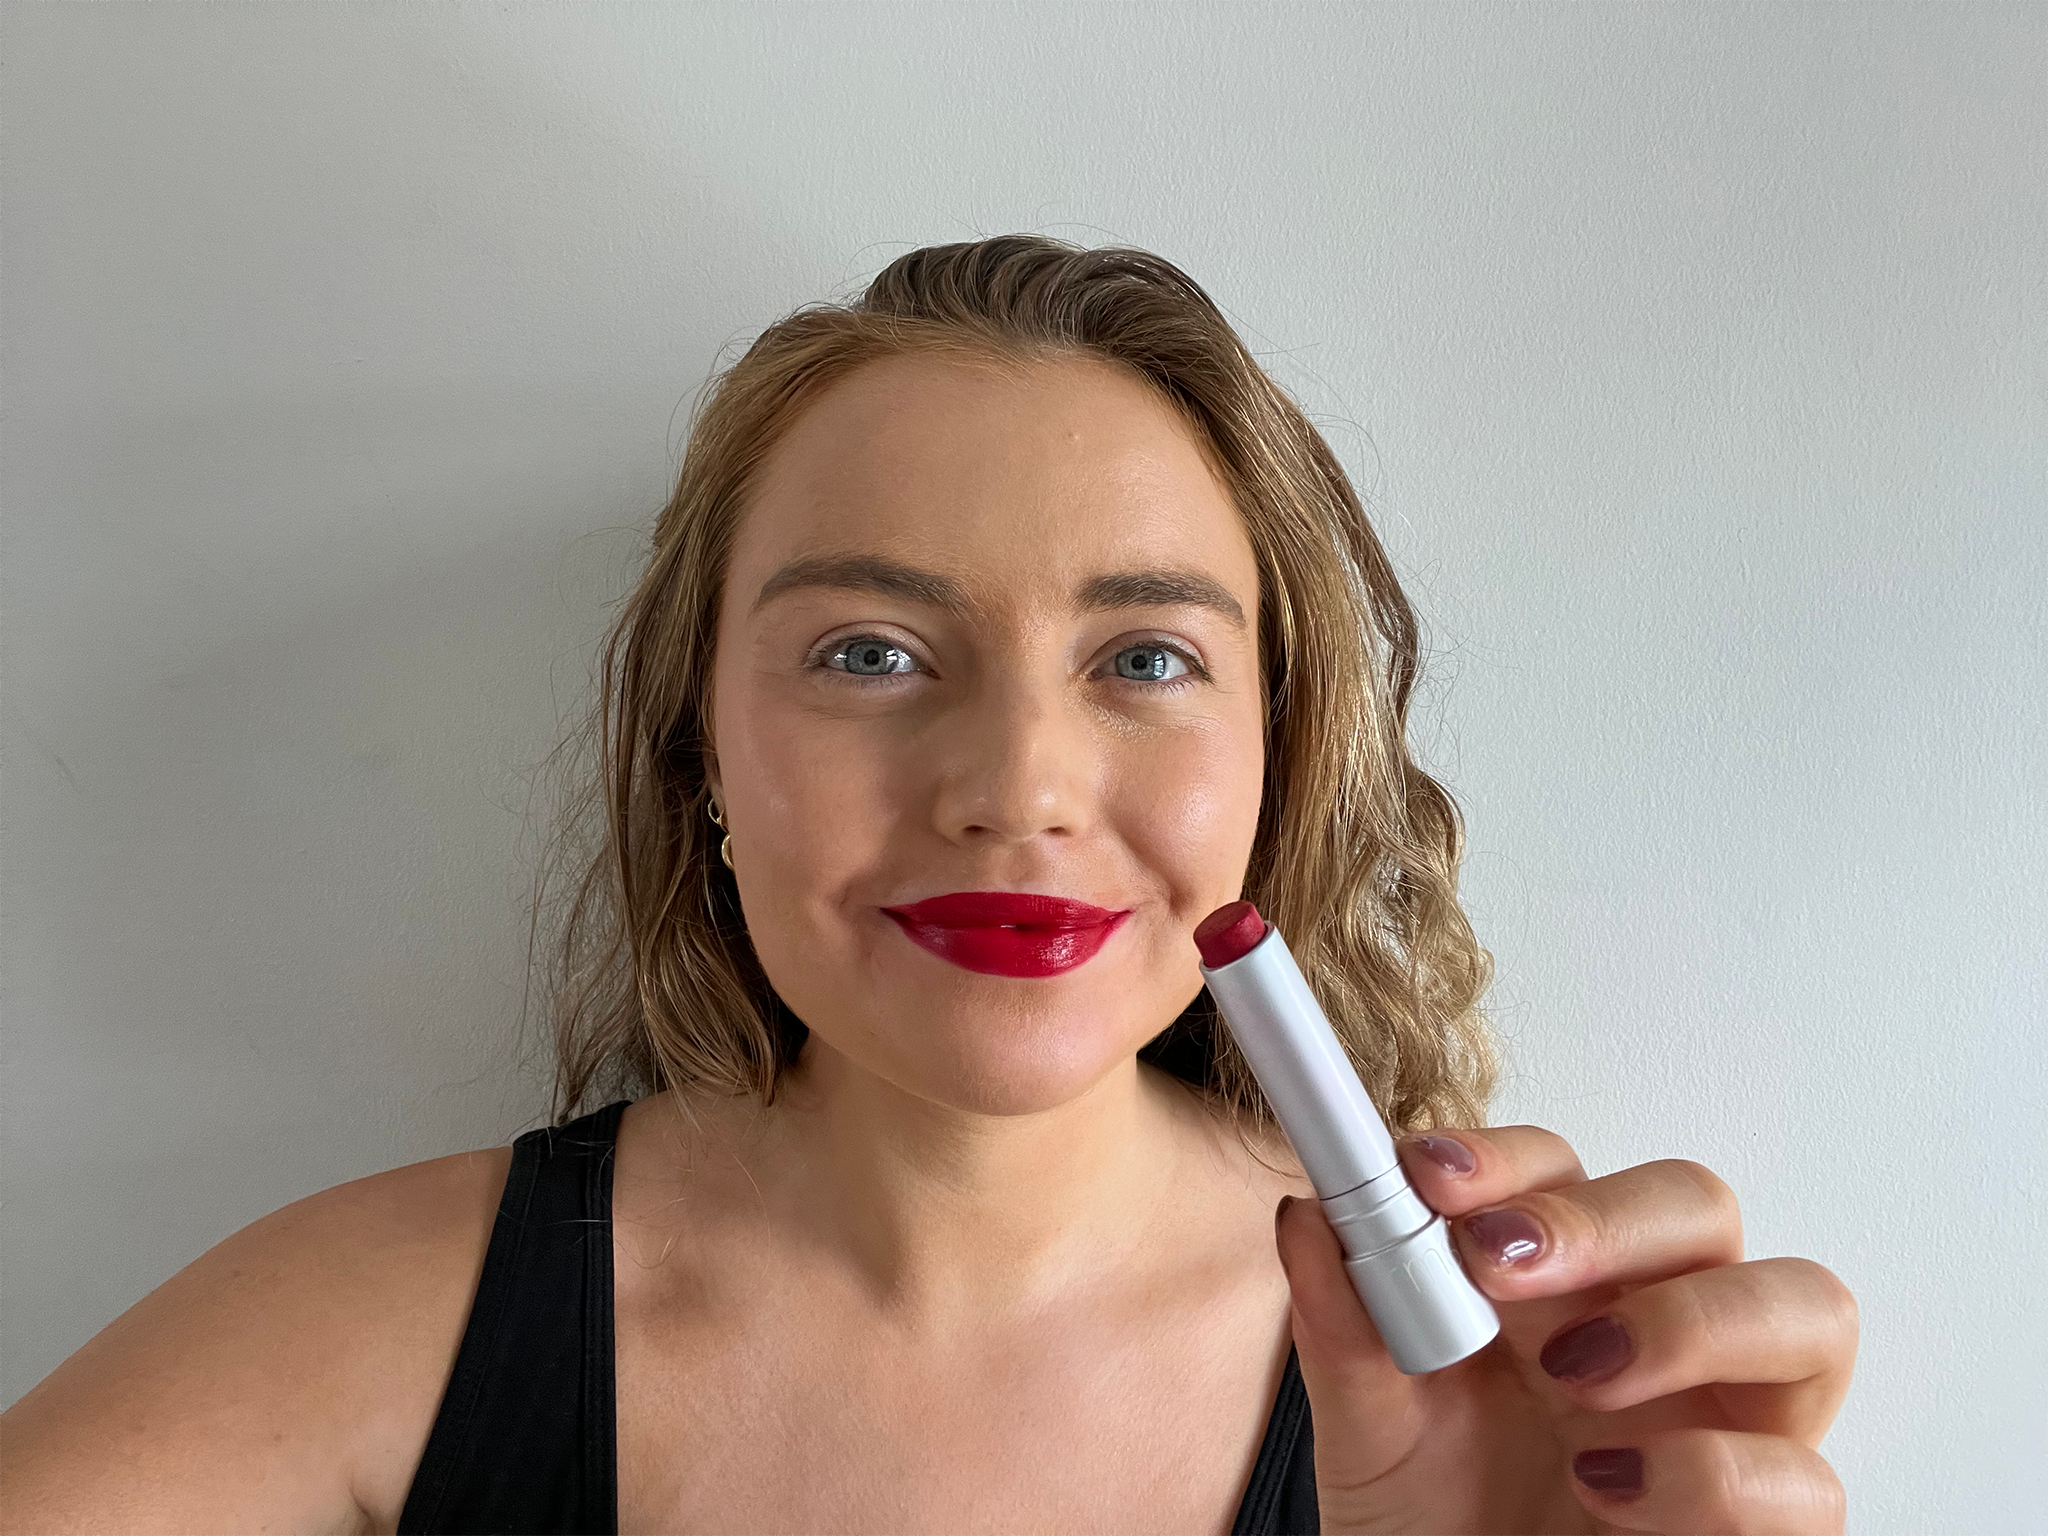 RMS Beauty wild with desire lipstick